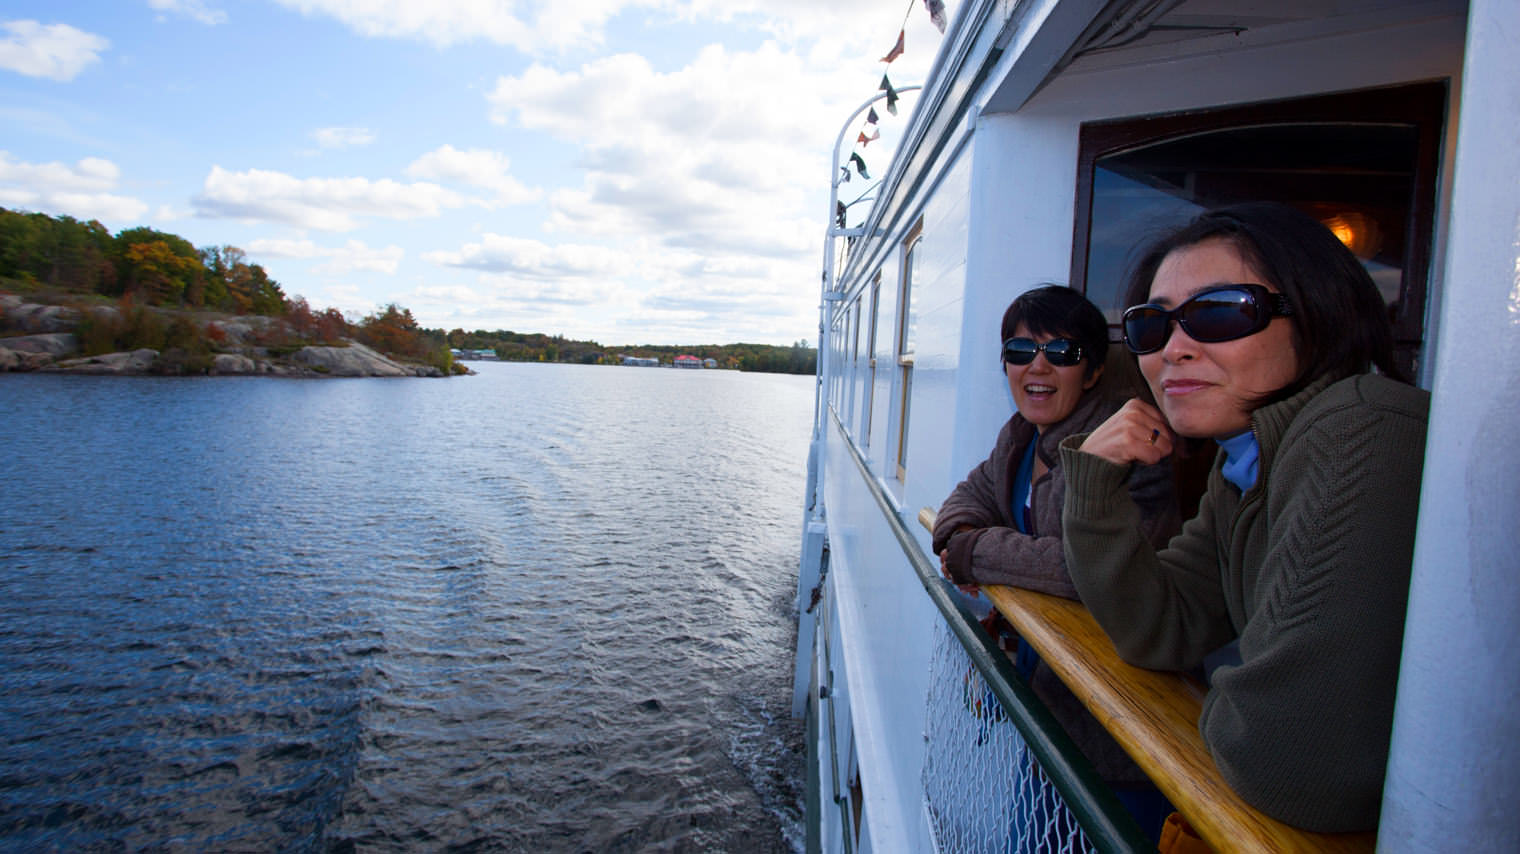 Muskoka Boat Cruise - Best Places to Visit in Canada